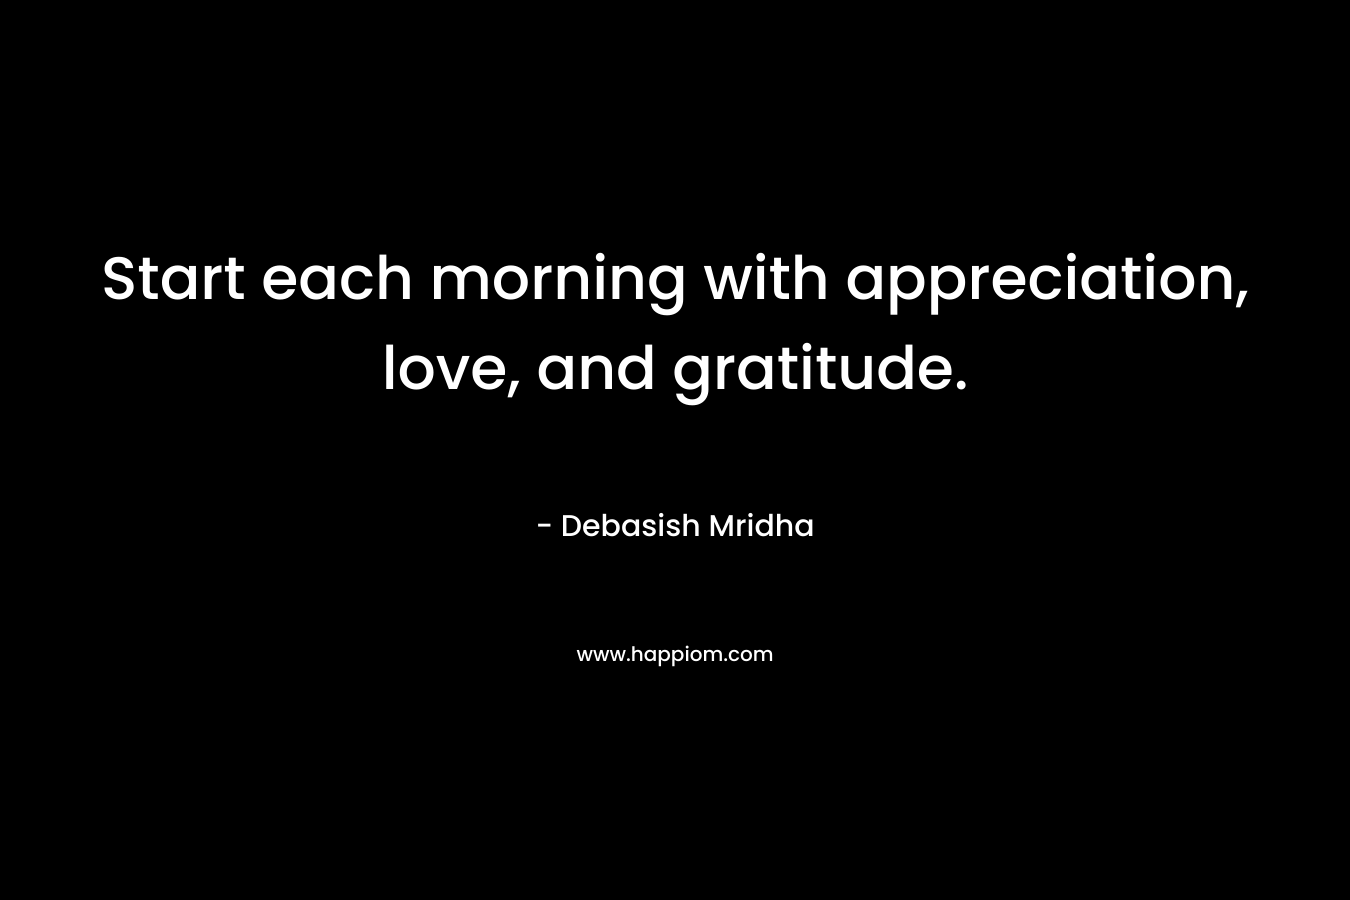 Start each morning with appreciation, love, and gratitude.